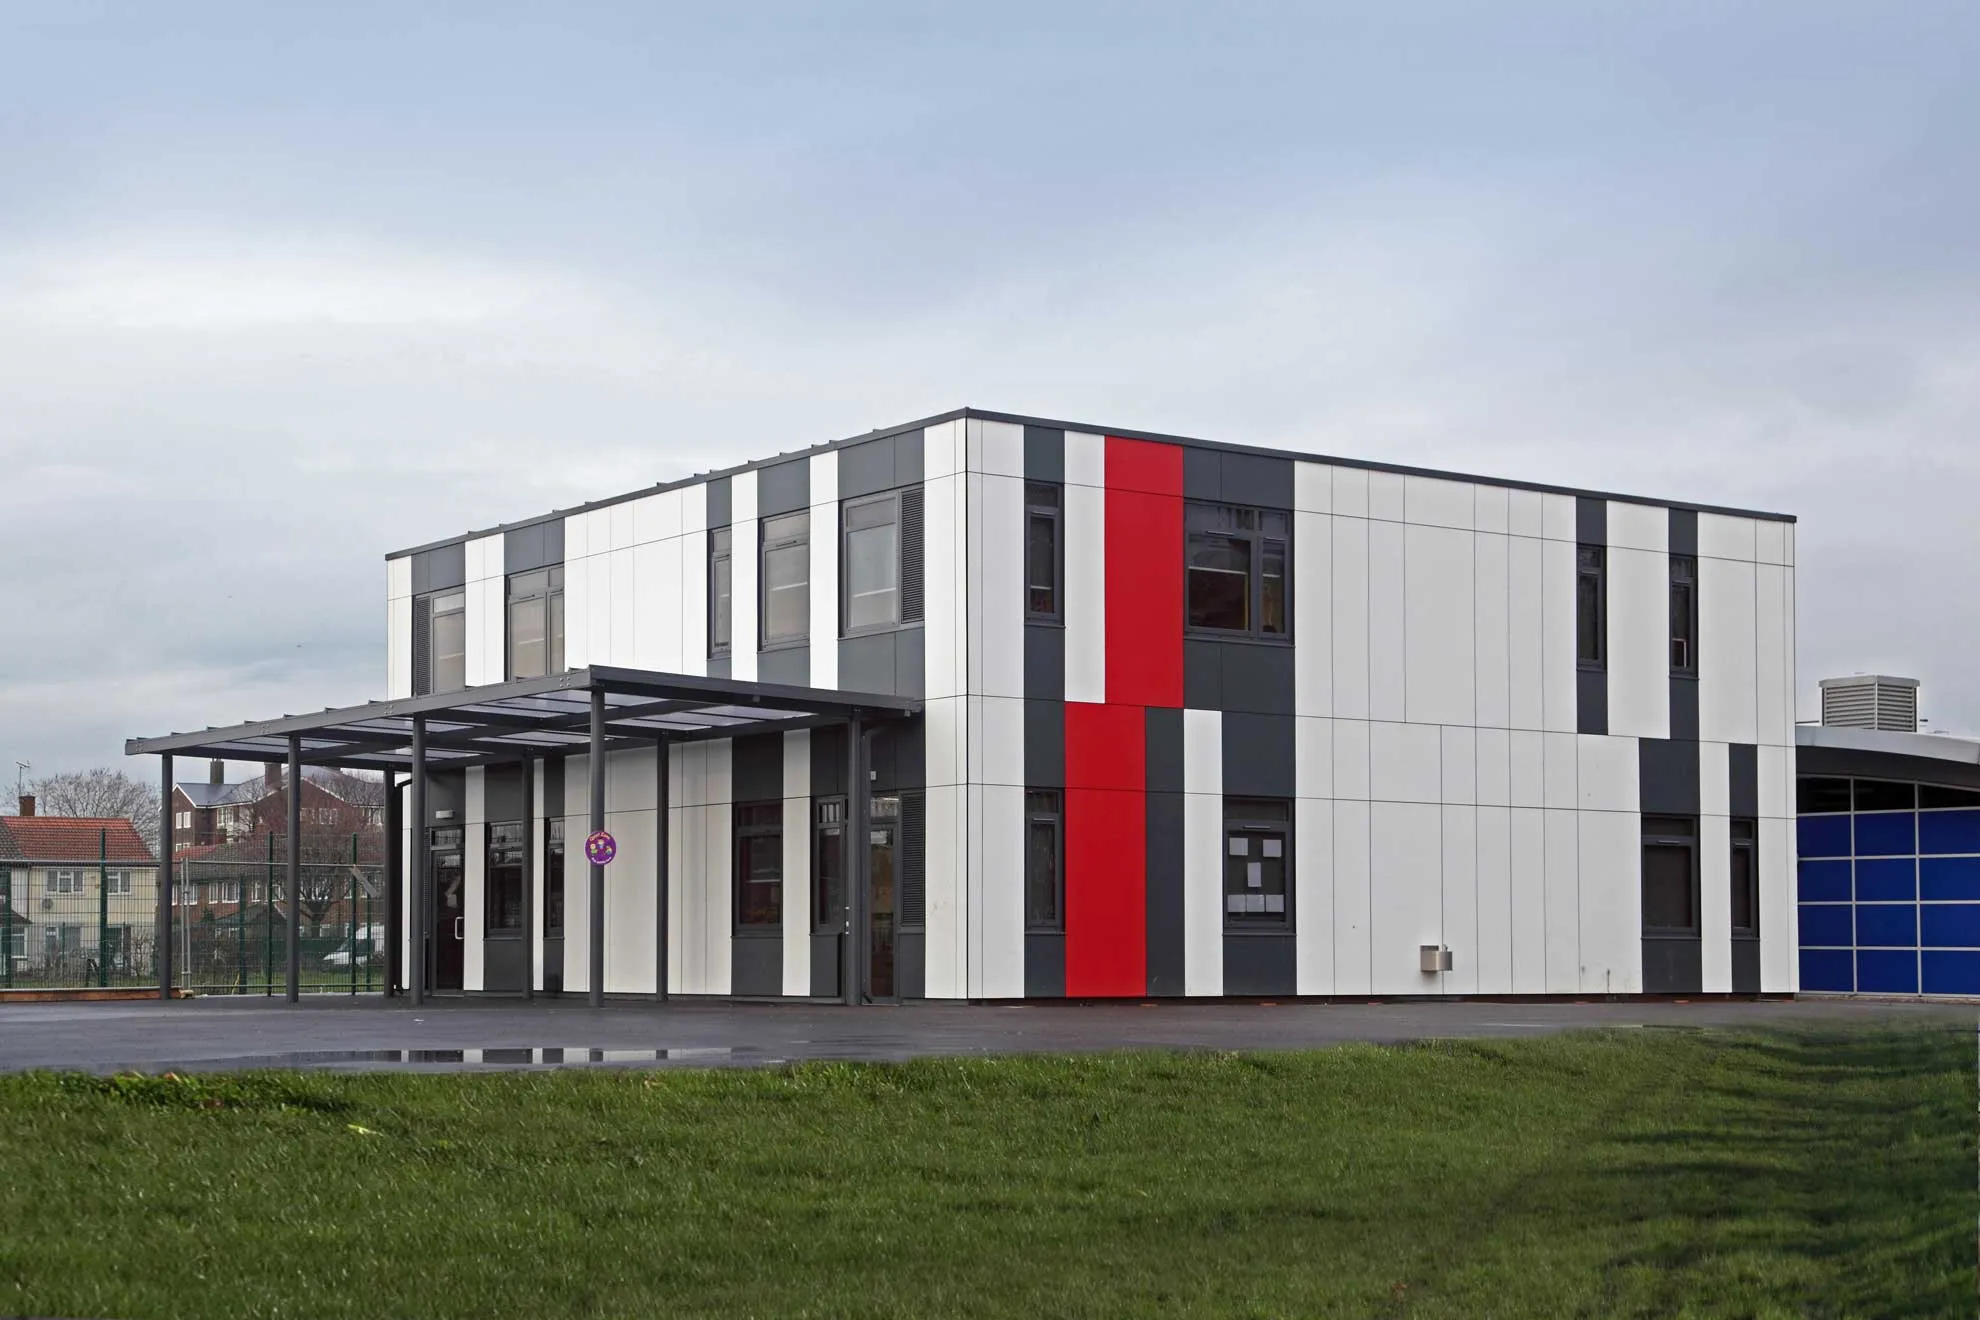 Picture shows a modular school building with colourful cladding